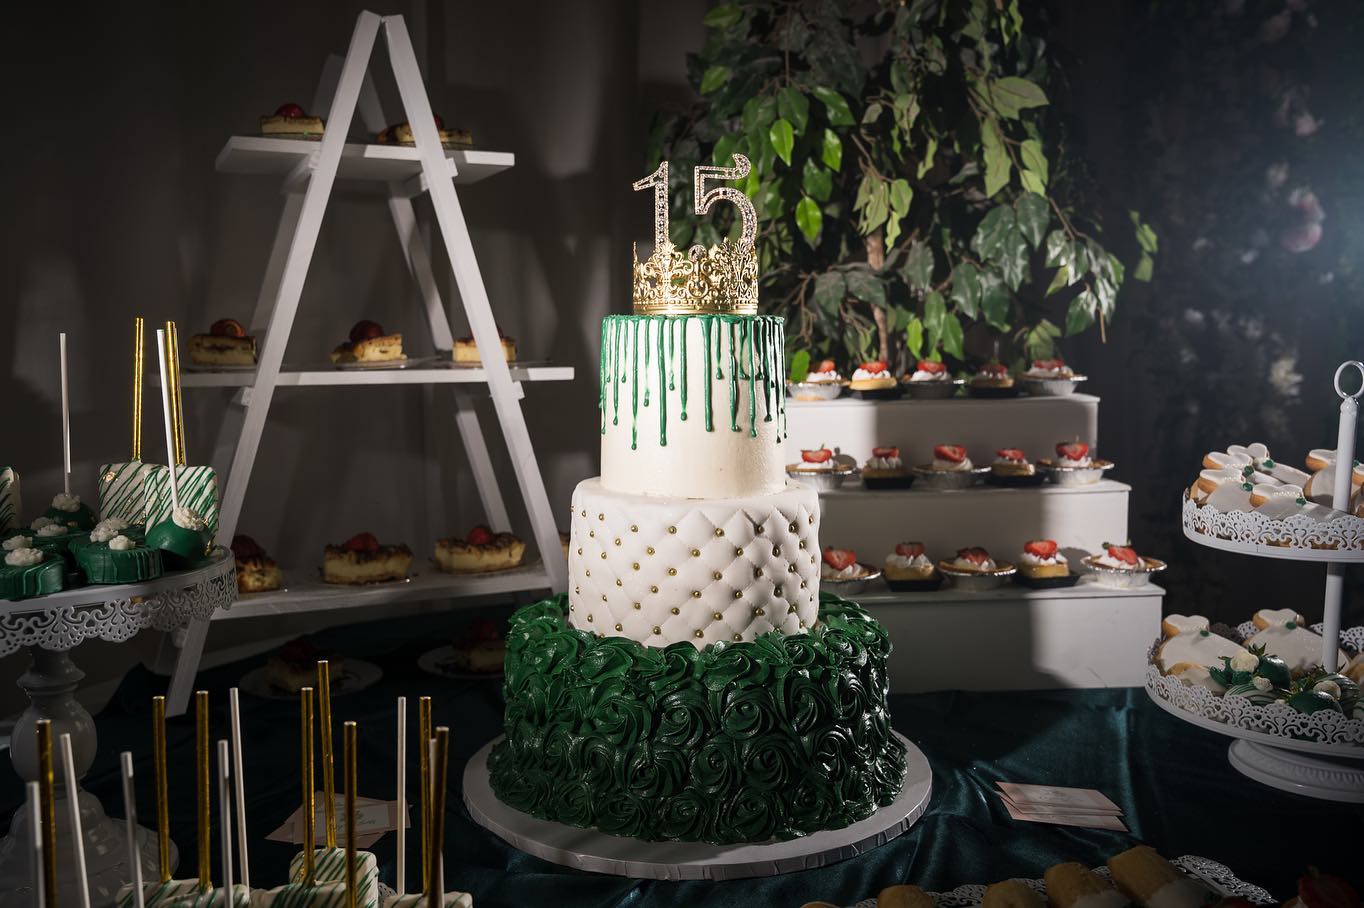 Quinceañera Cakes: How You Can Cut Costs, Then Cut The Cake